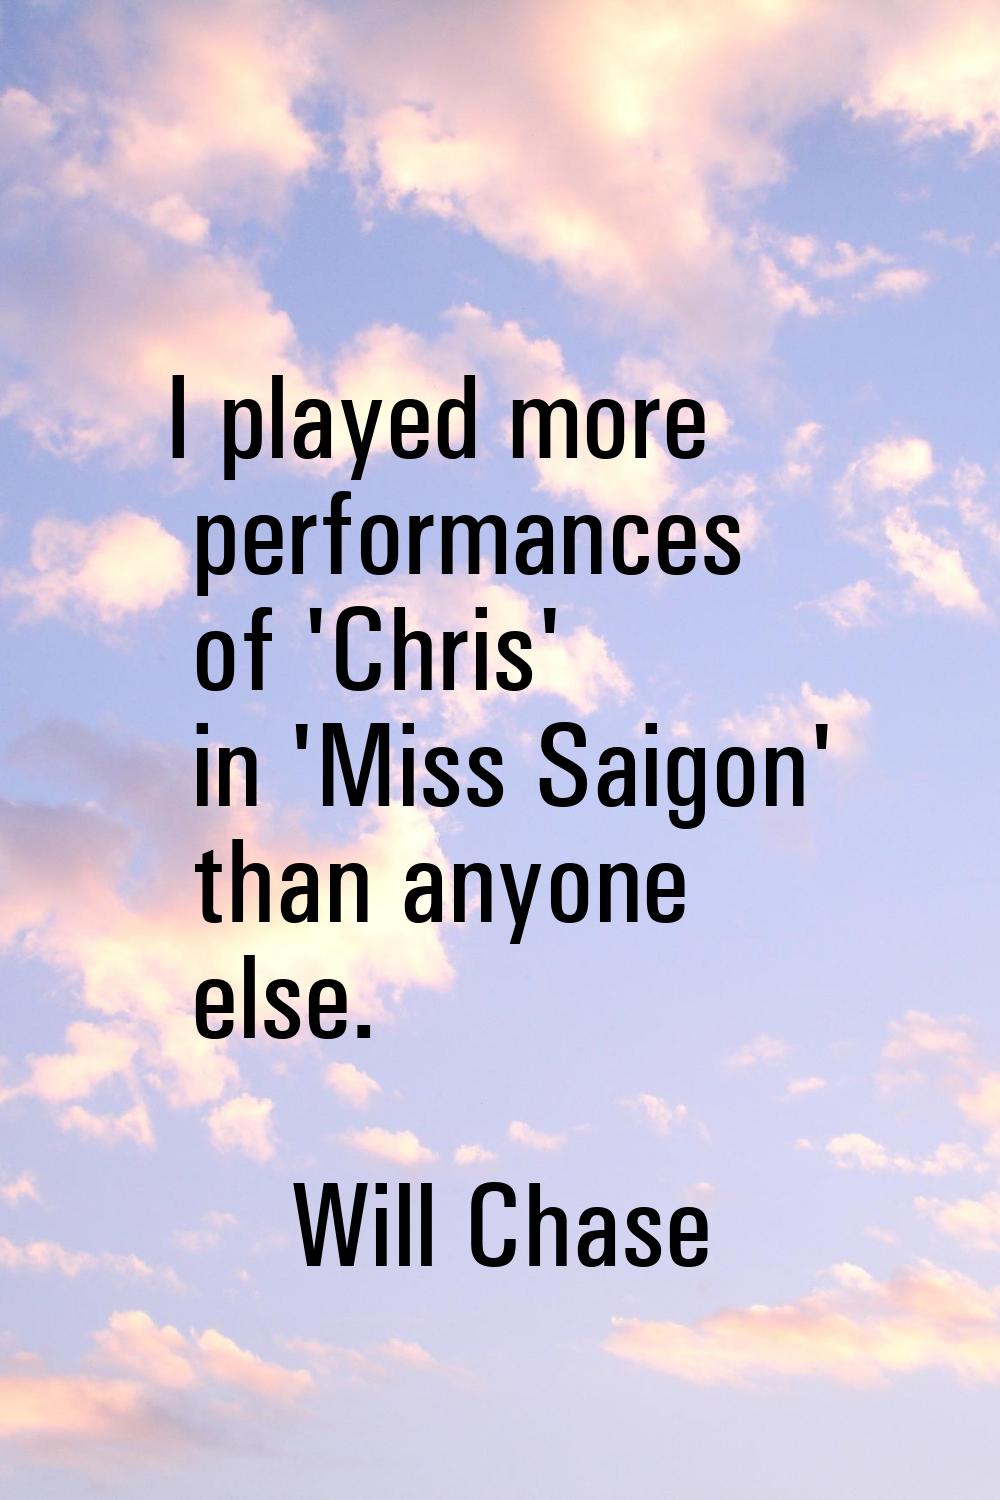 I played more performances of 'Chris' in 'Miss Saigon' than anyone else.